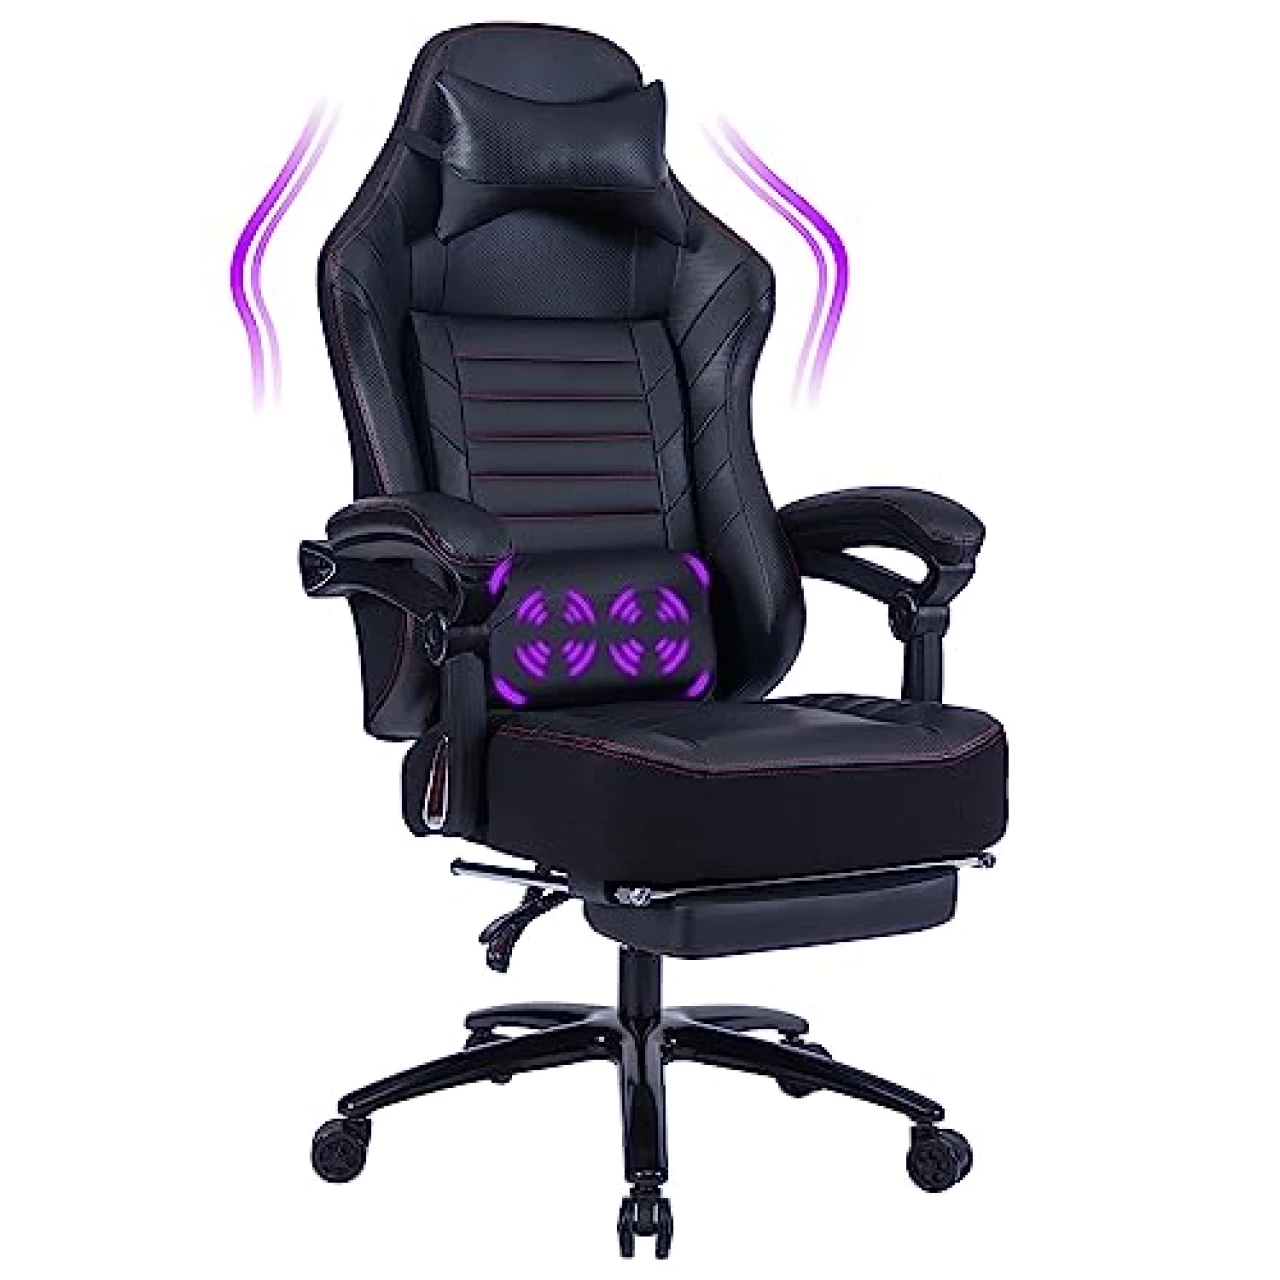 Fantasylab Big and Tall Gaming Chair 400lb Gaming Chair with Footrest Massage Gaming Chair Memory Foam Adjustable Tilt Back Angle and Arm High